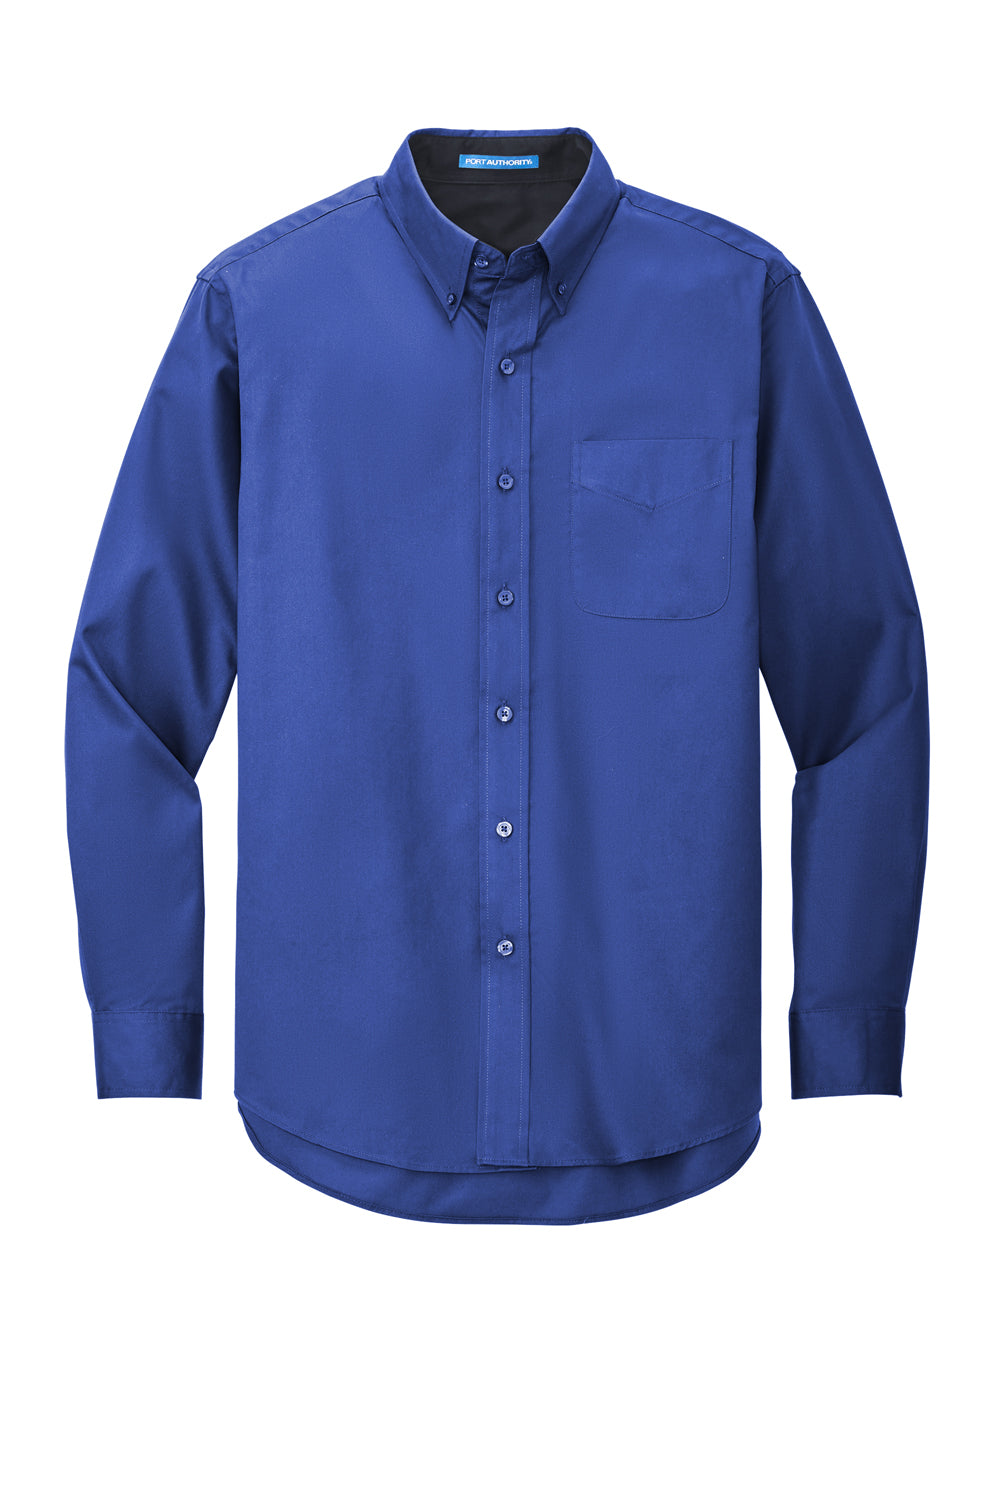 Port Authority S608/TLS608/S608ES Mens Easy Care Wrinkle Resistant Long Sleeve Button Down Shirt w/ Pocket Royal Blue Flat Front